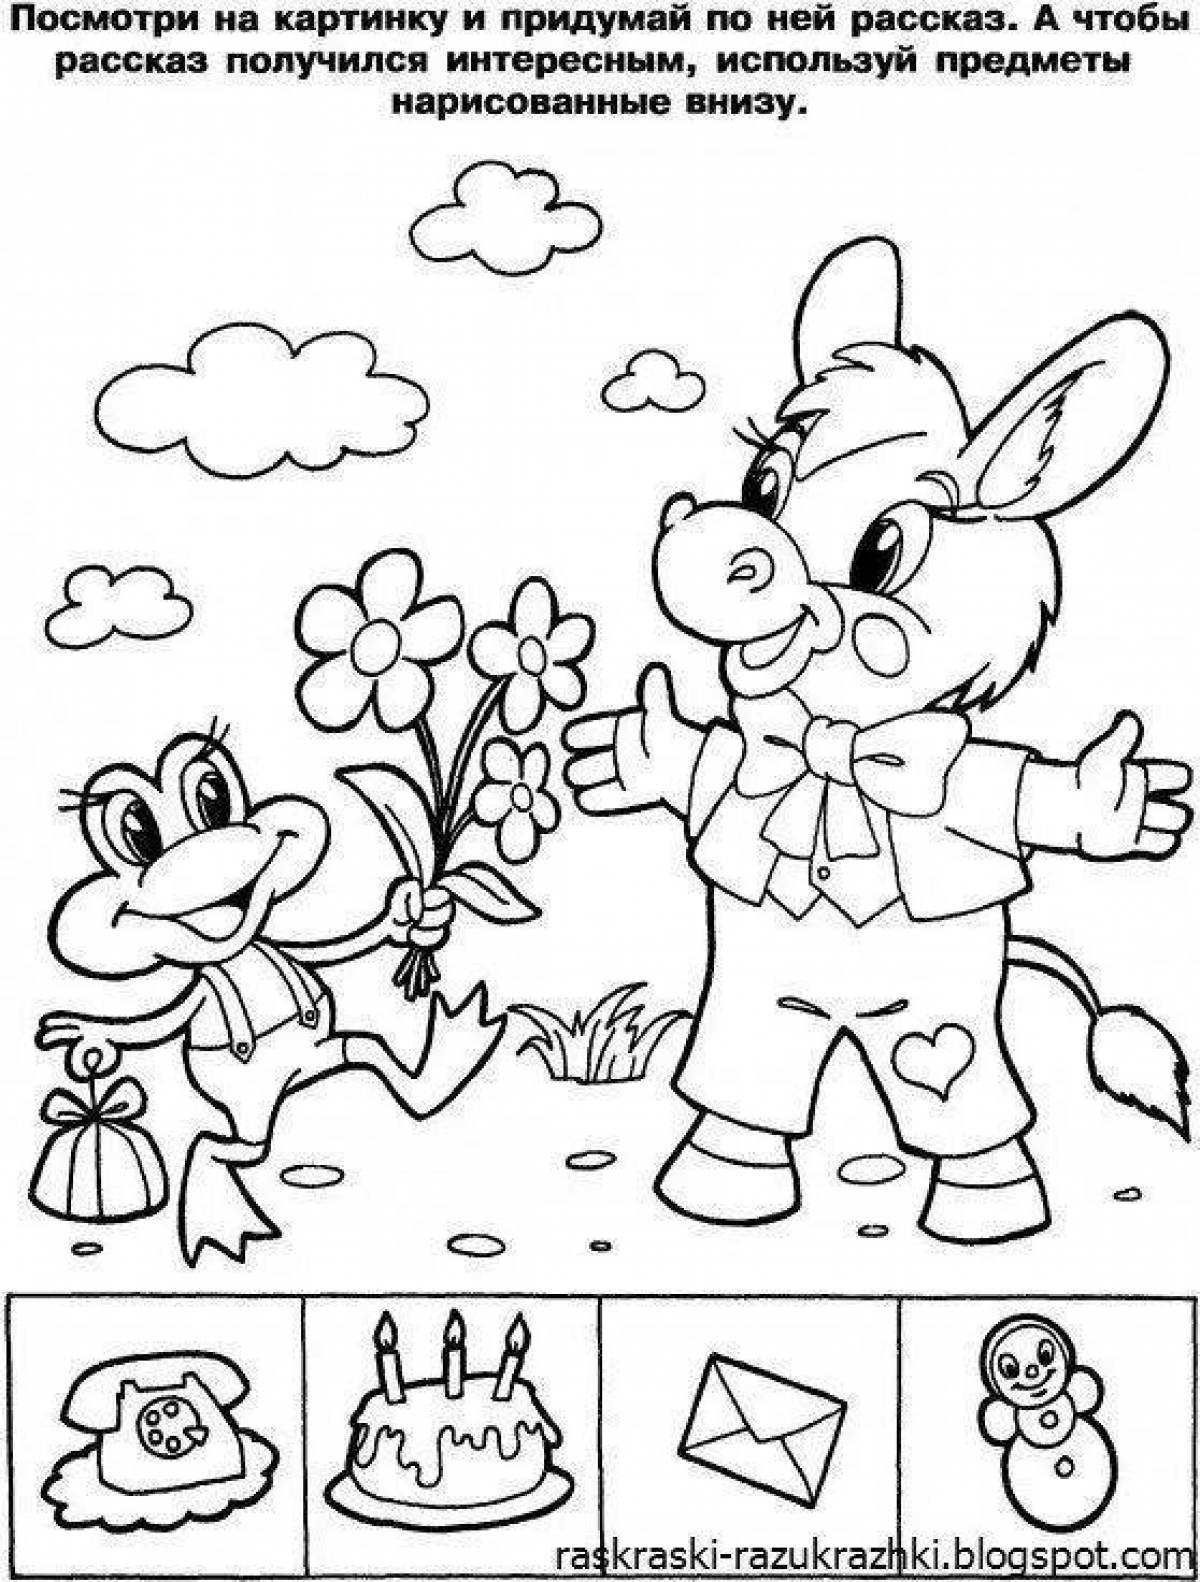 Educational coloring book for children 4-5 years old